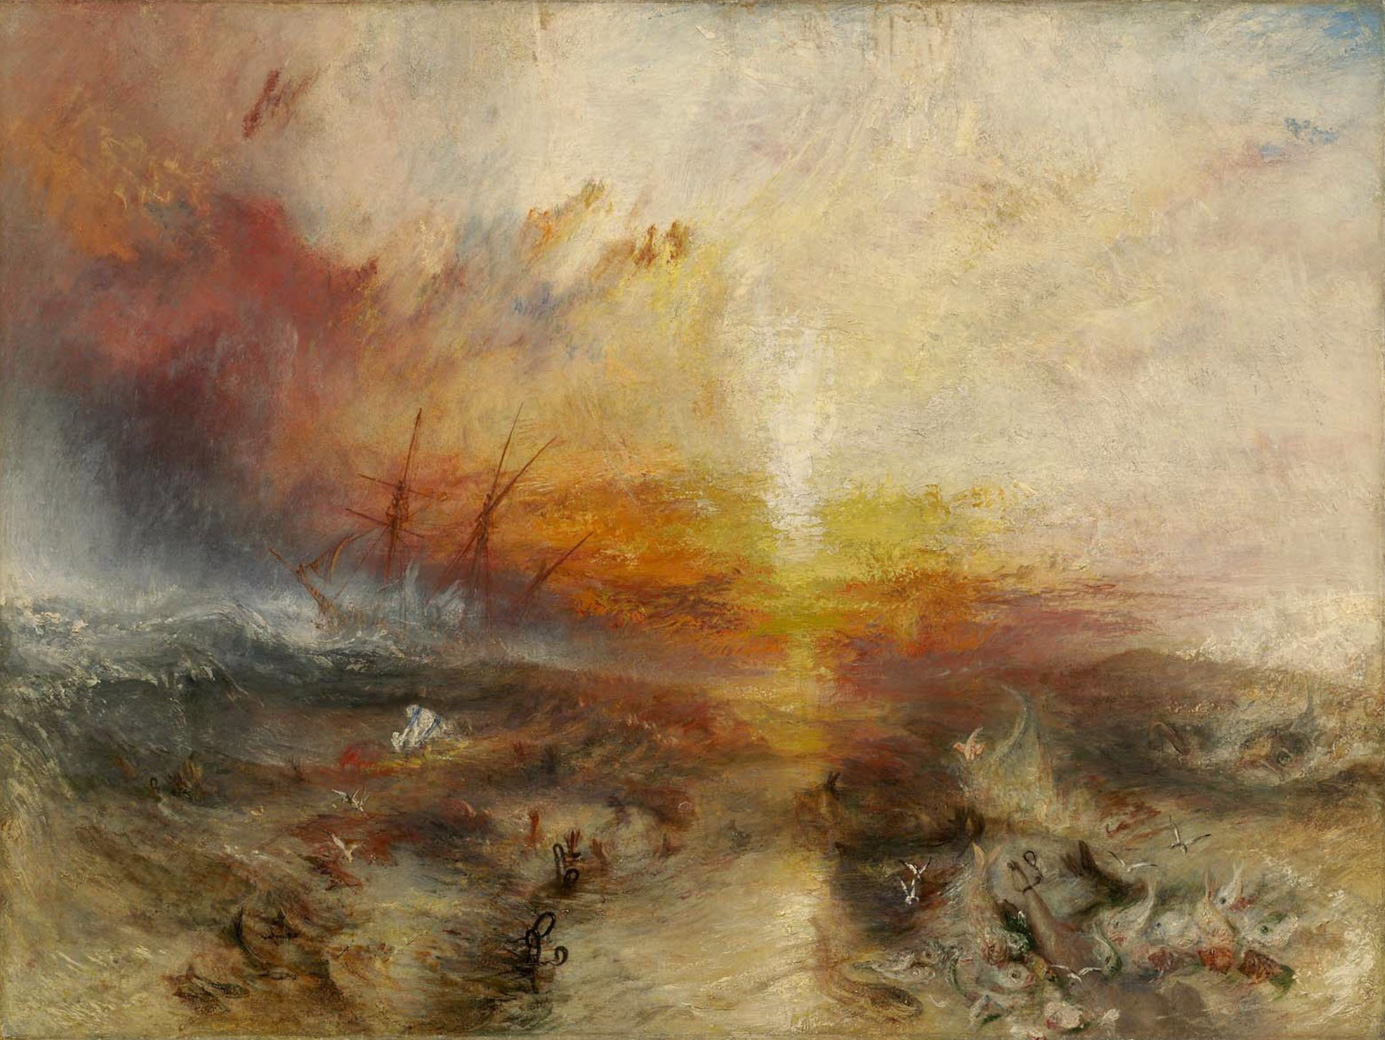 Turner's painting Slave Ship, at the Boston MFA, photo from Wikimedia